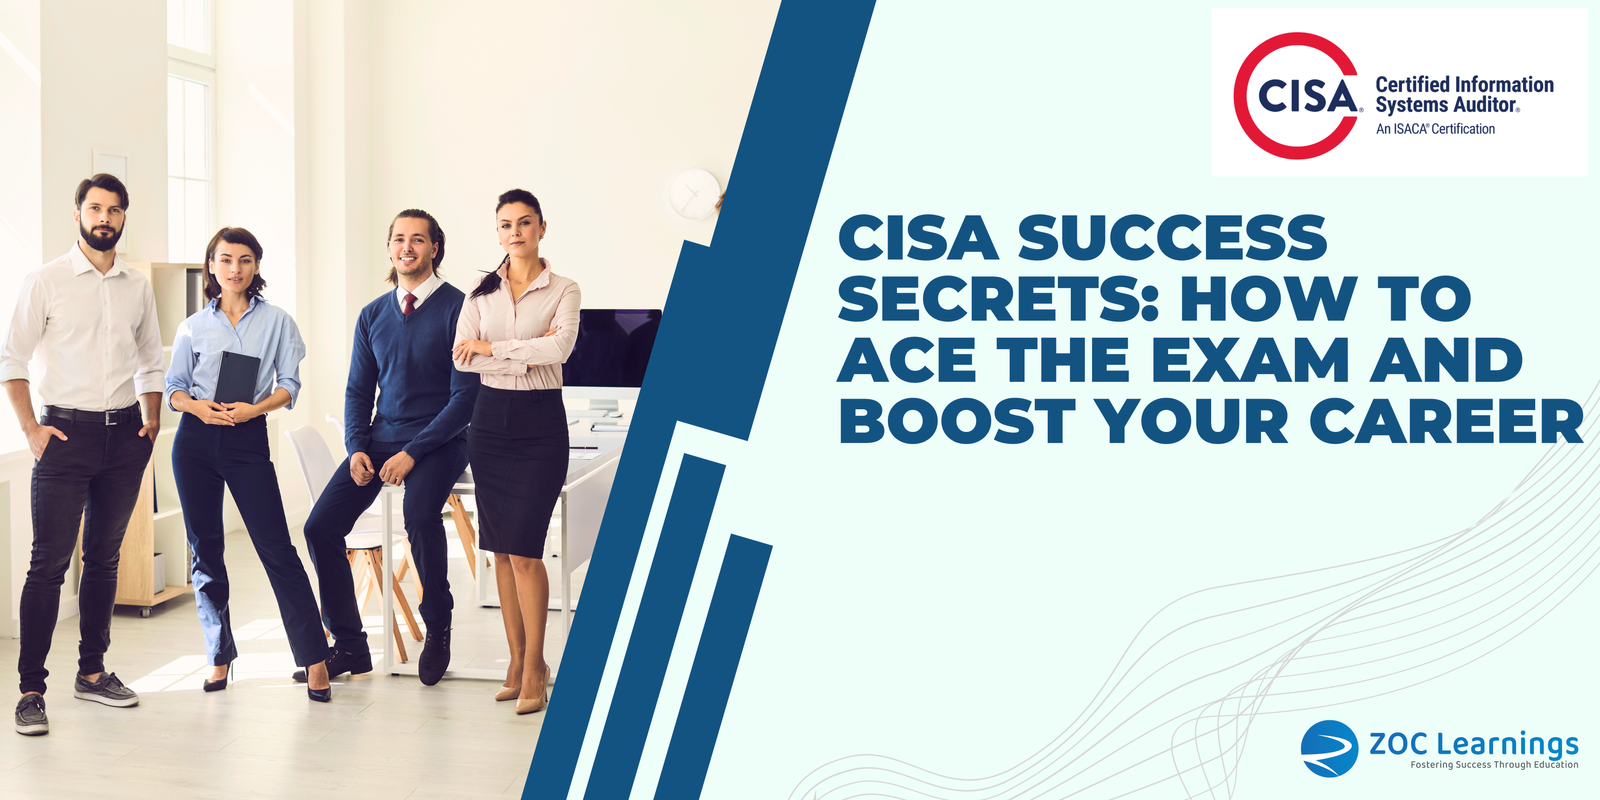 CISA Success Secrets: How to Ace the Exam and Boost Your Career